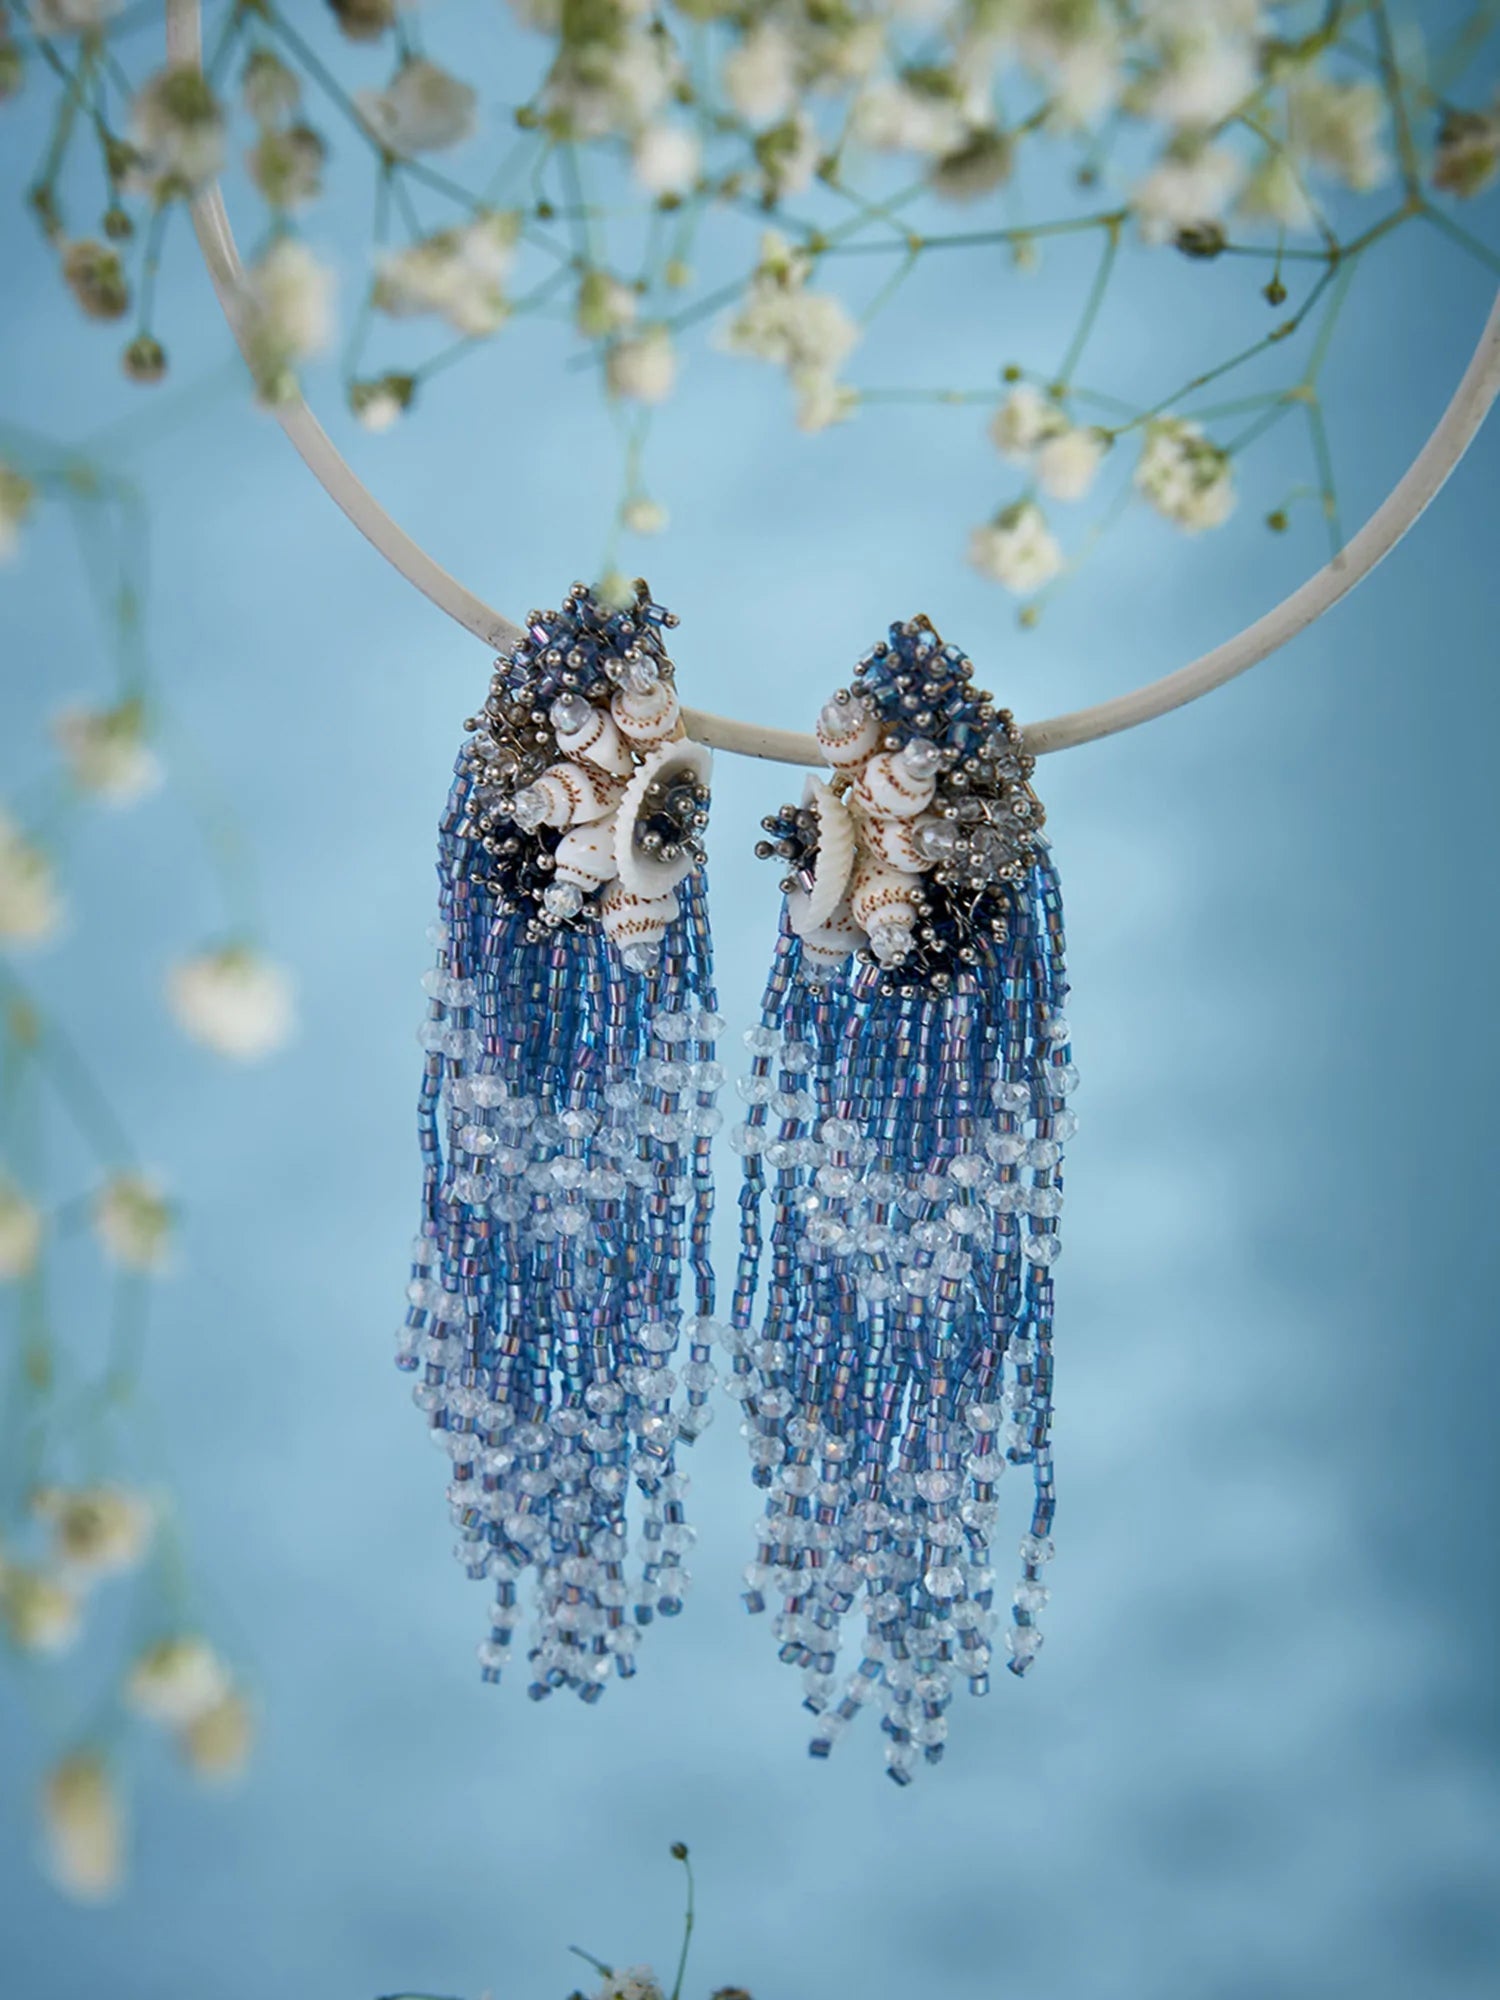 IOLANA BLUE DANGLINGS - House of D’oro